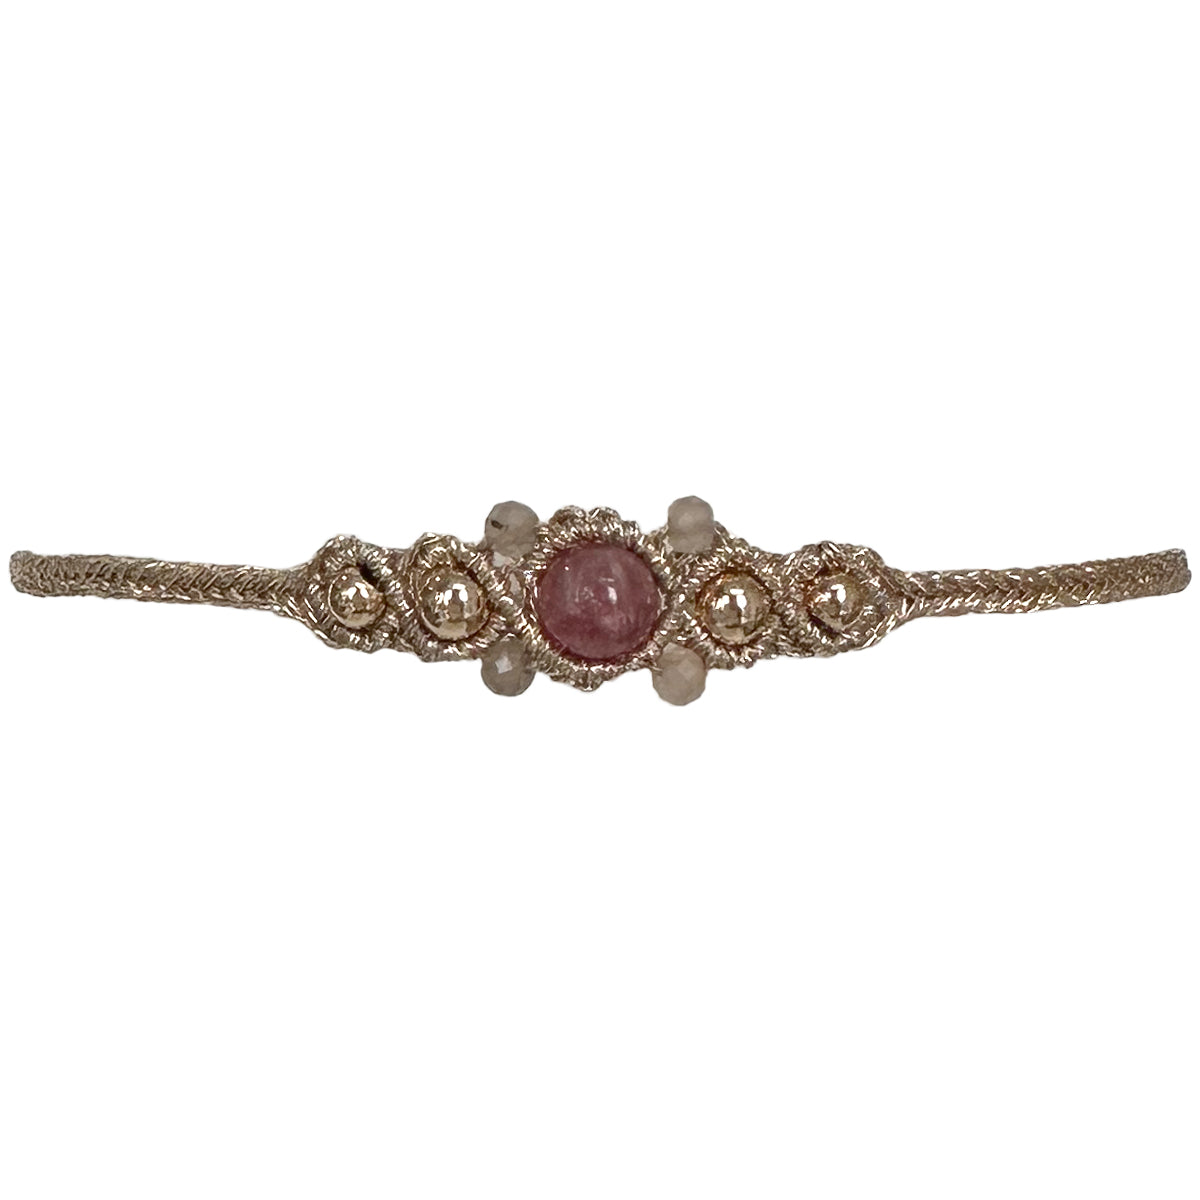 HANDWOVEN ORION BRACELET WITH ROSE GOLD DETAILS AND PINK TOURMALINE STONES